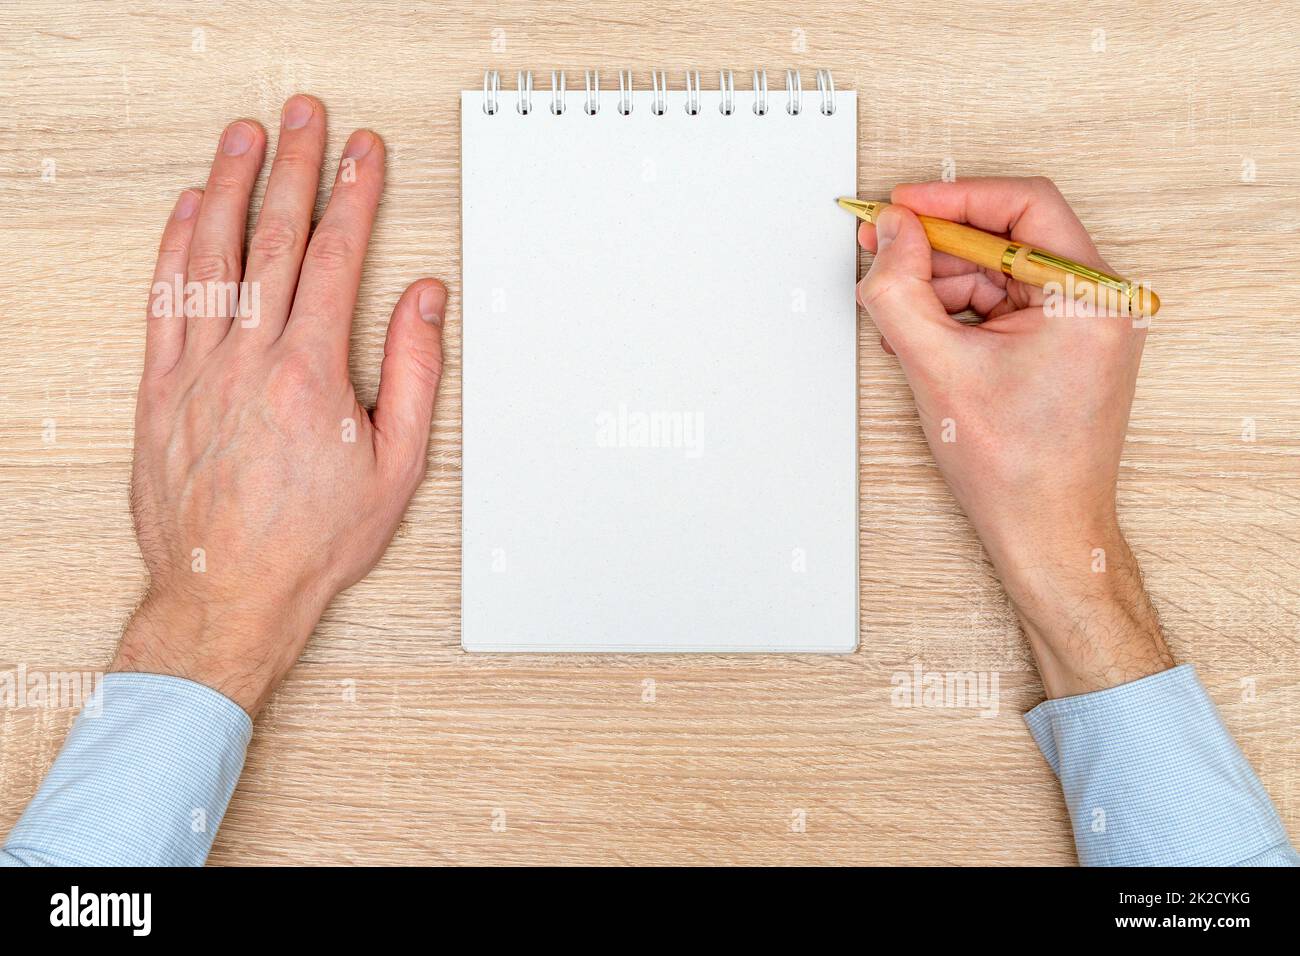 Hand writing in white blank open spiral notebook Stock Photo